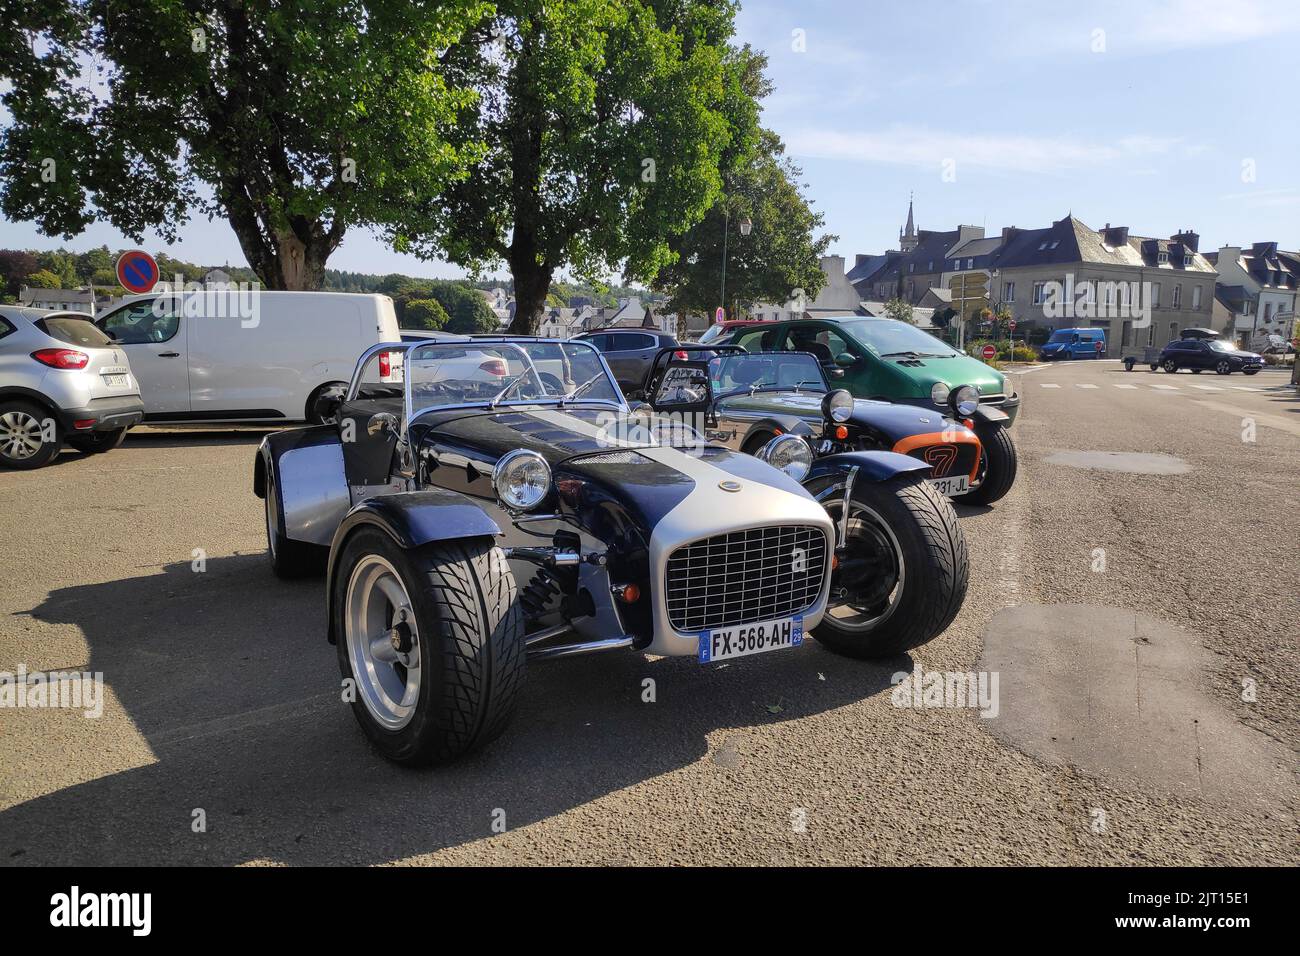 Huelgoat, France - August 13 2022: The Caterham 7 is a super-lightweight sports car produced by Caterham Cars in the United Kingdom. Stock Photo